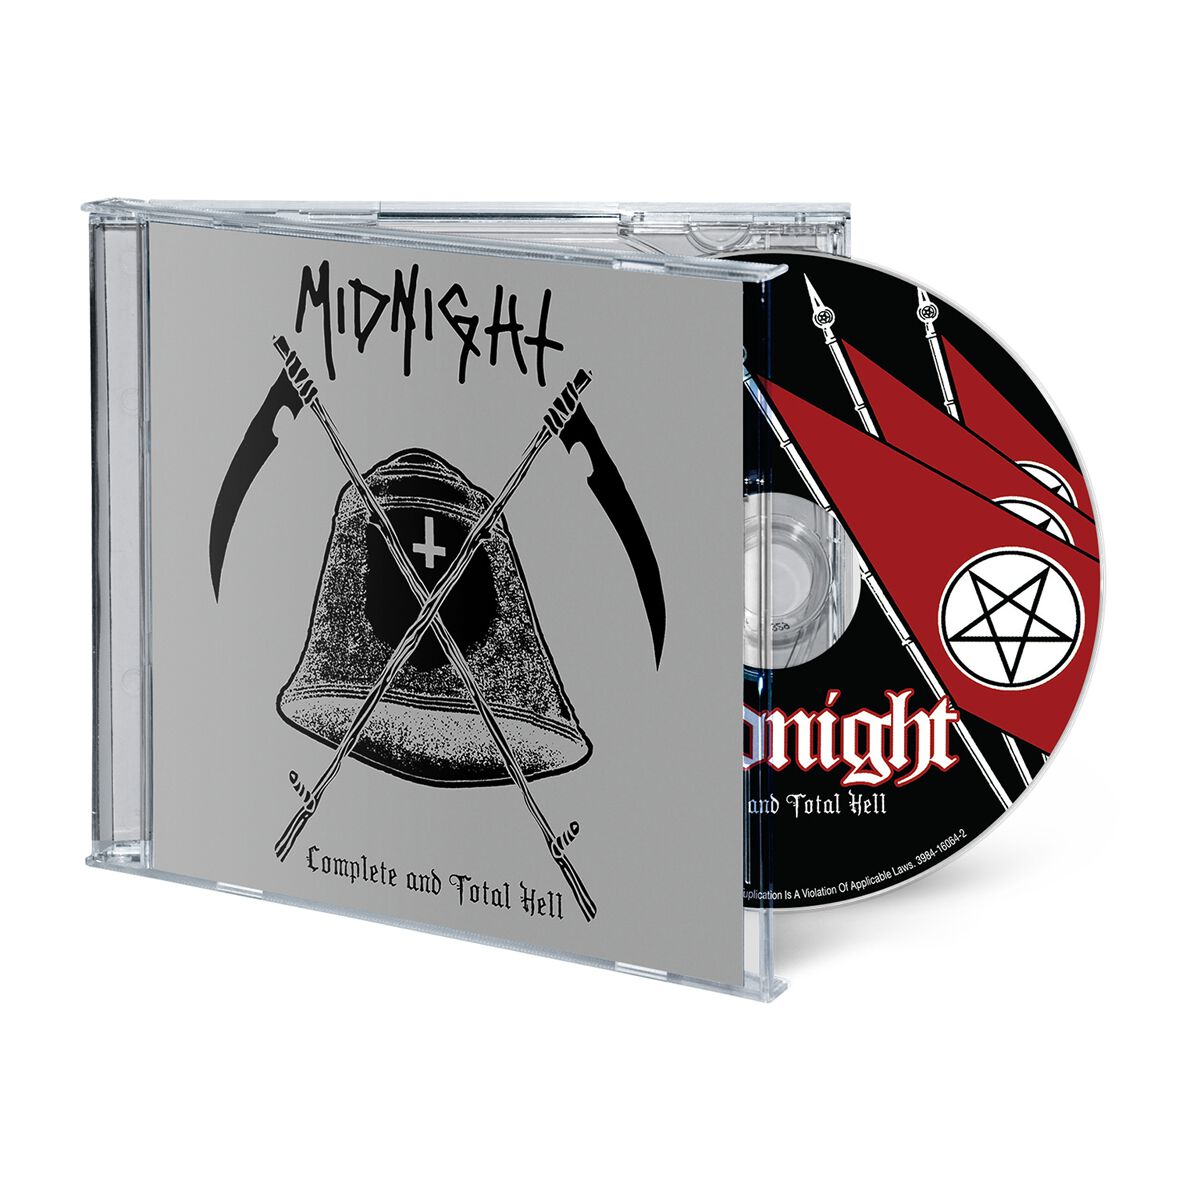 Levně Midnight Complete And Total Hell CD standard